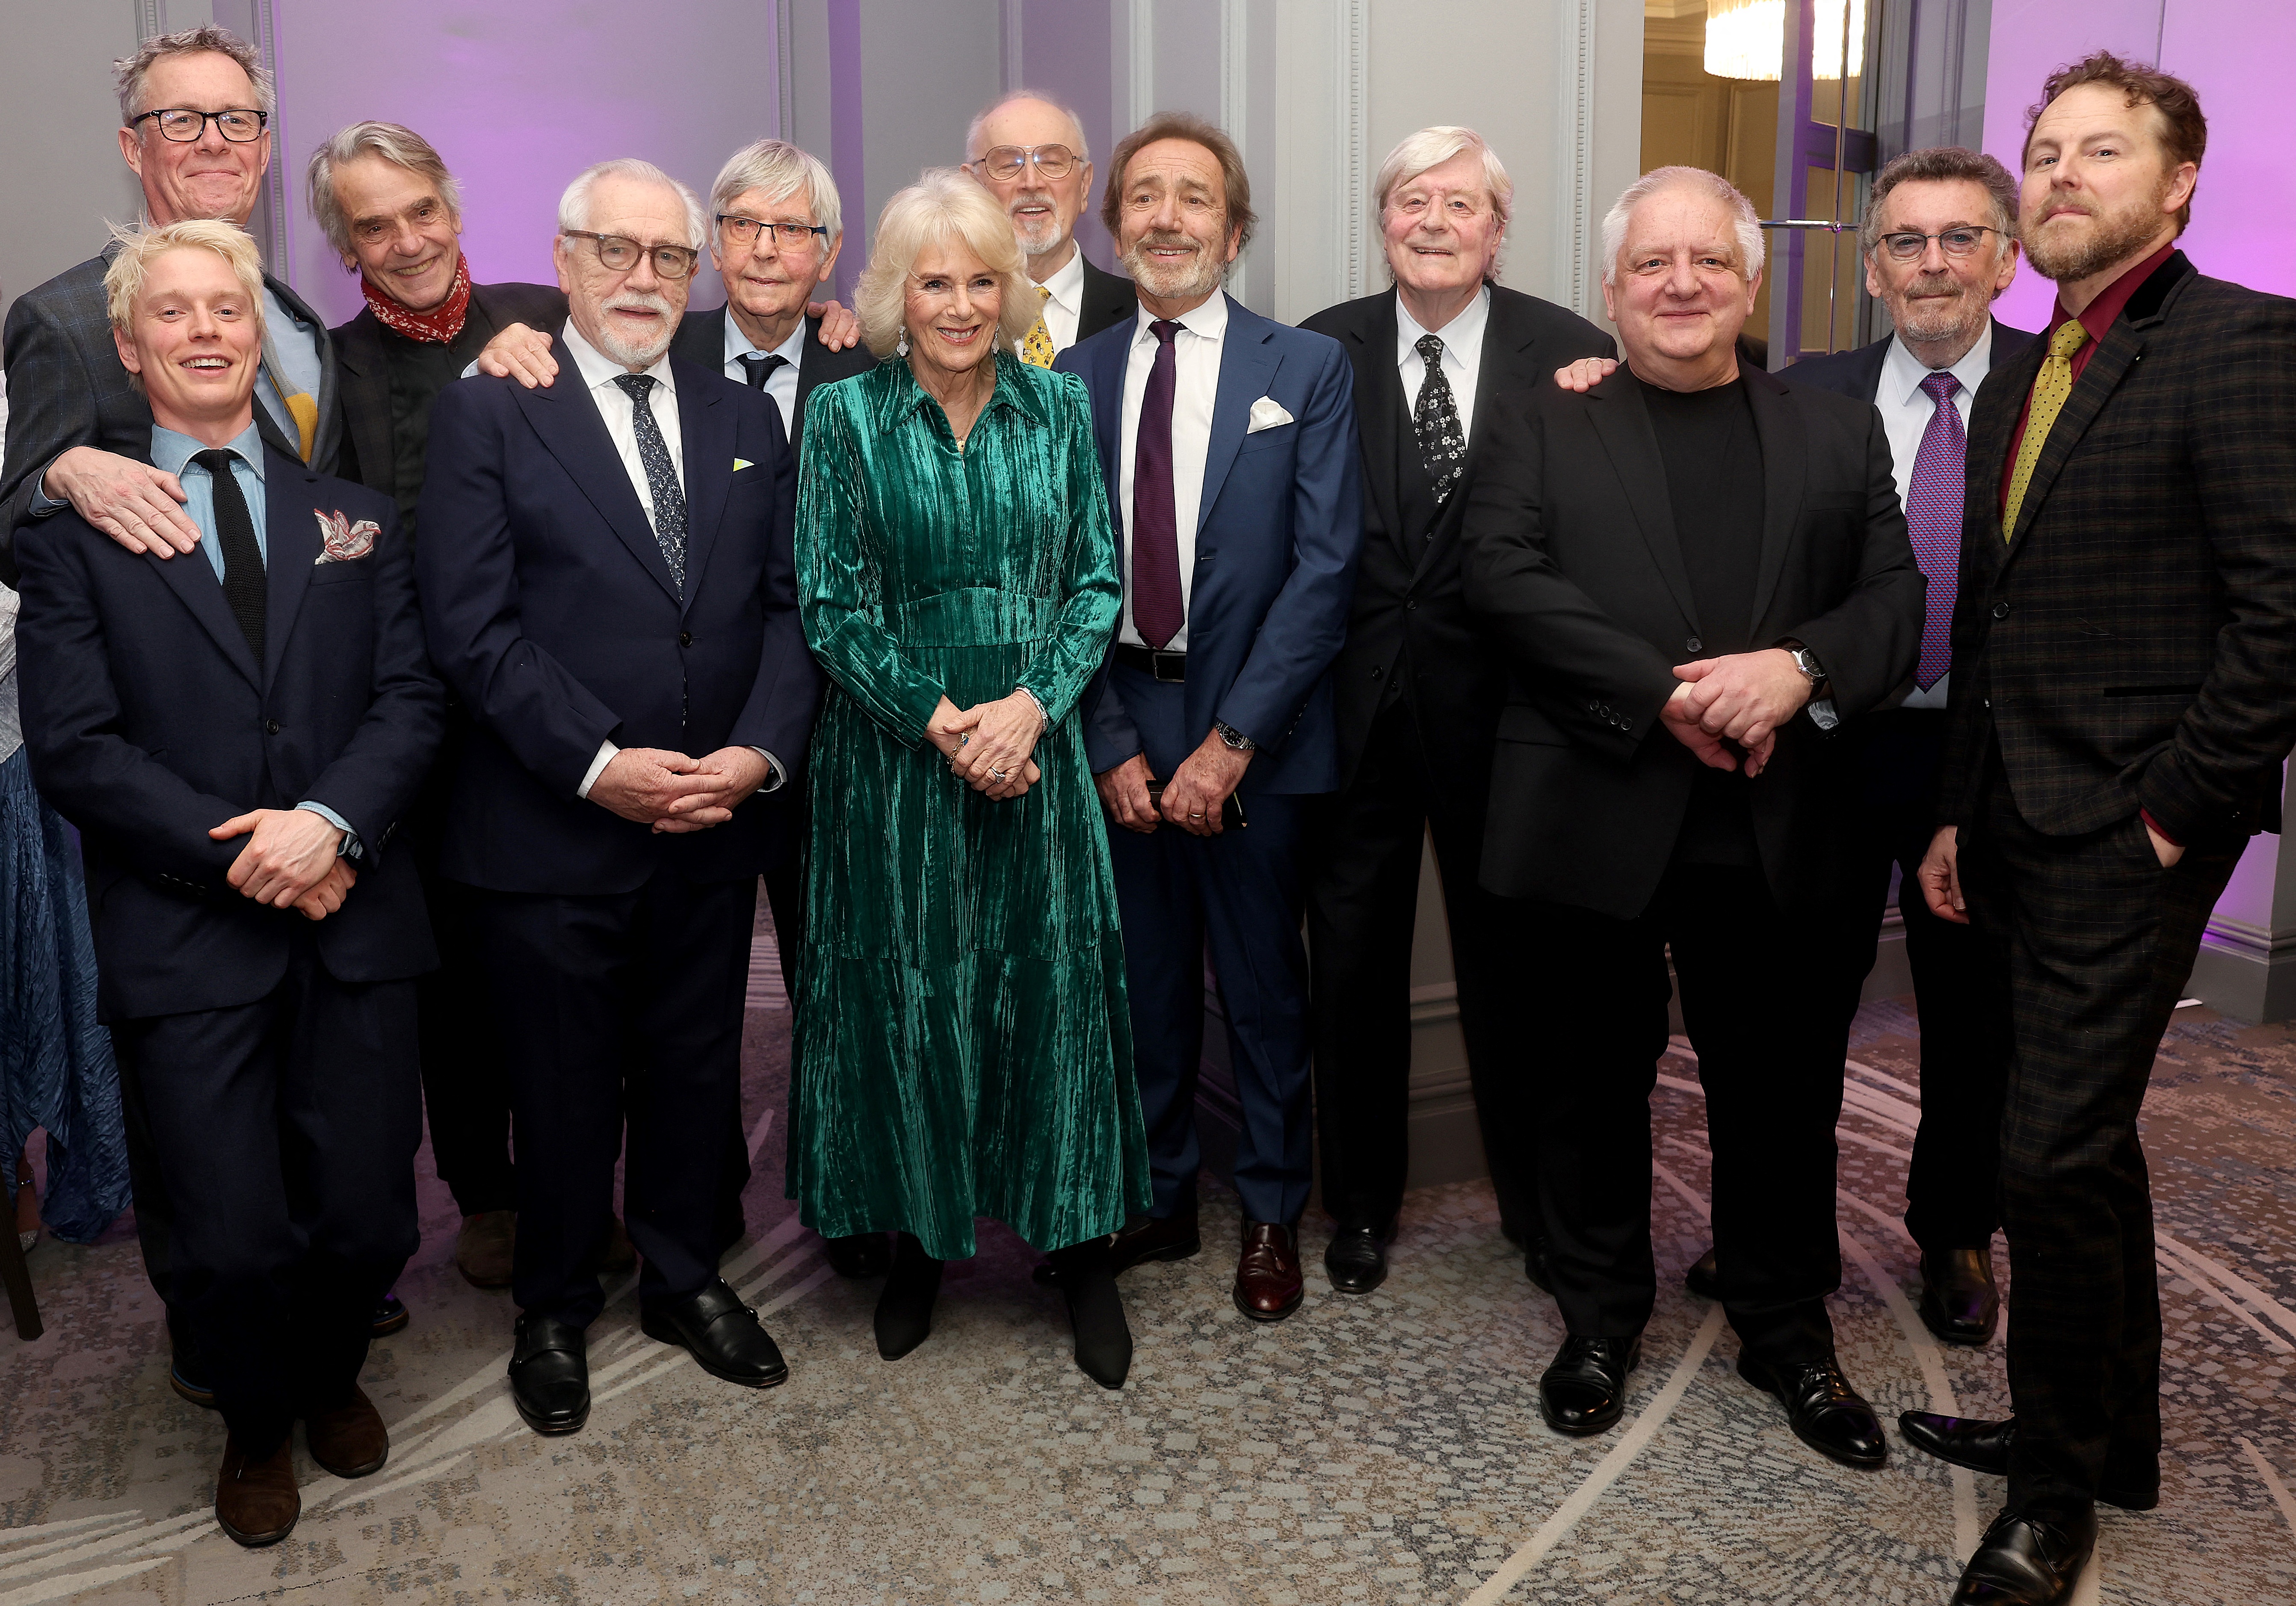 Britain's Queen Camilla, Alex Jennings, Freddie Fox, Jeremy Irons, Brian Cox, Tom Courtenay, Peter Egan, Robert Lindsay, Martin Jarvis, Simon Russell Beale, Robert Powell and Samuel West, 2024 | Source: Getty Images